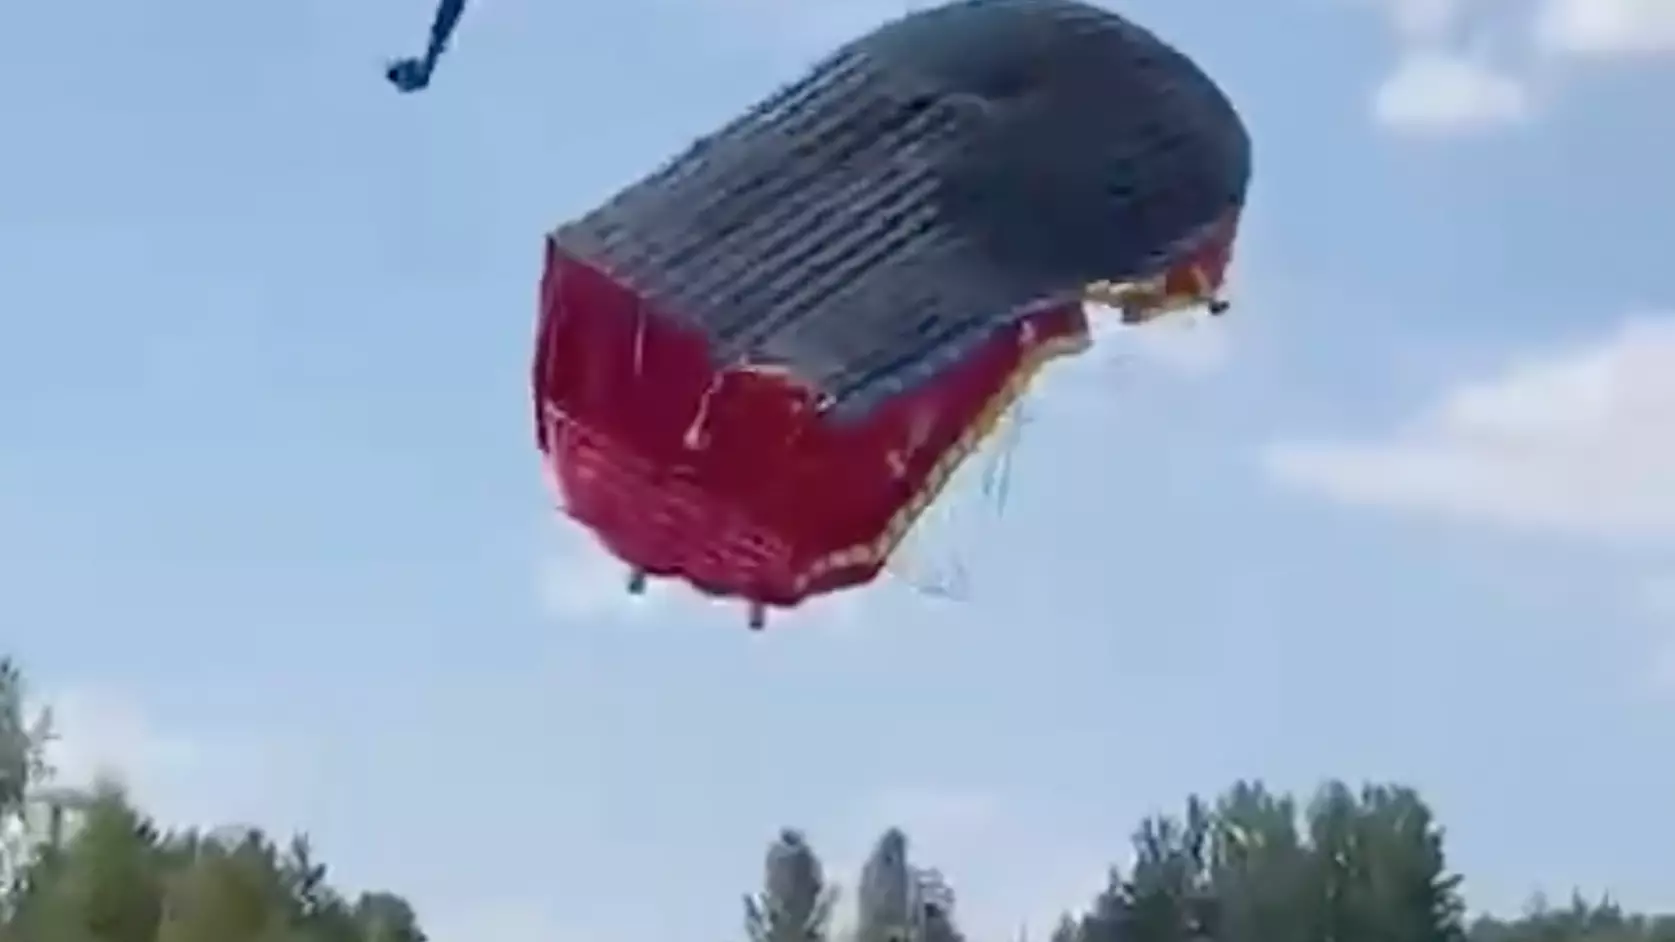 Horrifying Moment Bouncy Castles Come Loose And Fly Off Hurling Children Into The Air 